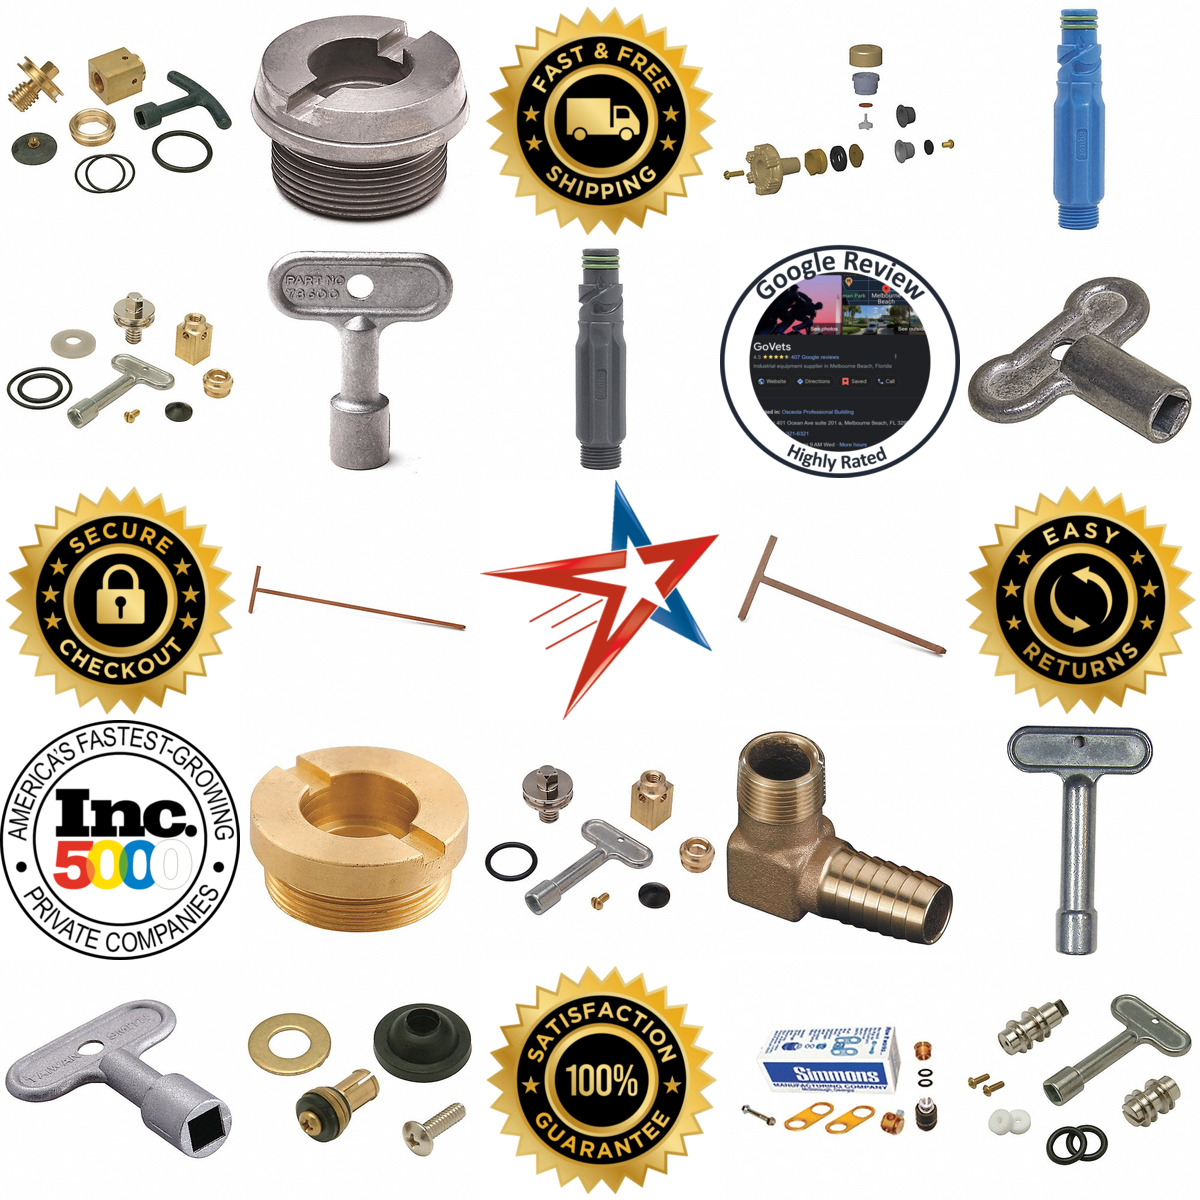 A selection of Wall and Yard Hydrant Accessories products on GoVets